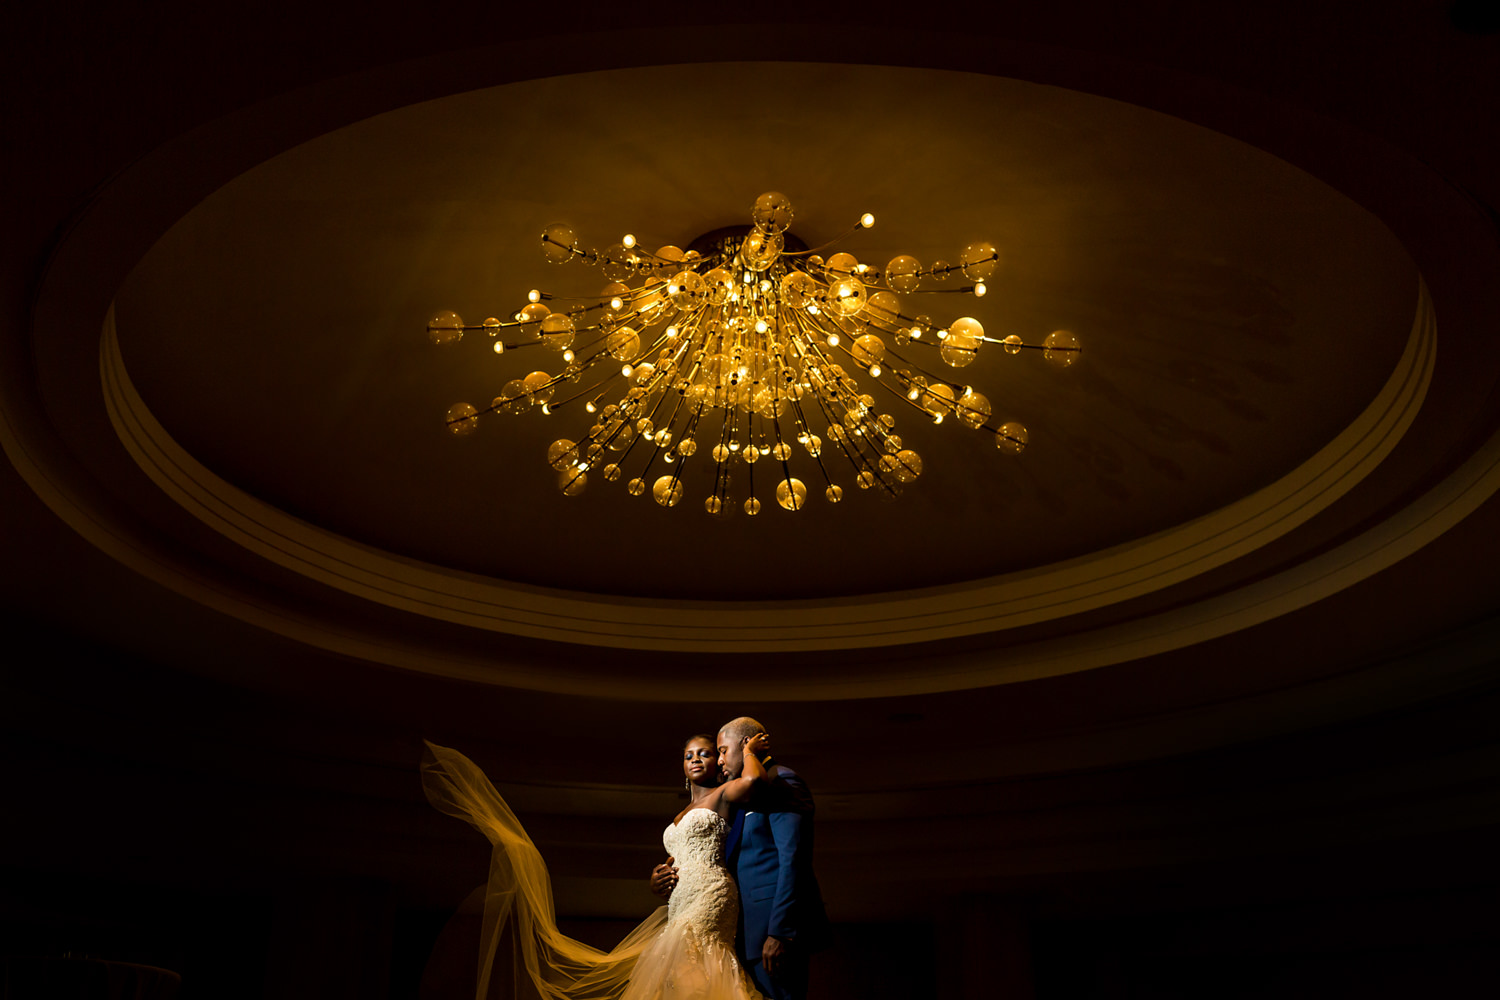 A DC hotel wedding, Georgetown Wedding, This was a winter wedding and we ran out of sunlight for portraits so I took them into a basement ballroom and created a dramatic portrait under a chandelier, Veil flying, a gorgeous black couple embracing, Procopio Photography, best top Washington DC photographer, best top Maryland photographer, best top Virginia photographer, best top DMV photographer, best top wedding photographer, best top commercial photographer, best top portrait photographer, best top boudoir photographer, modern fine art portraits, dramatic, unique, different, bold, editorial, photojournalism, award winning photographer, published photographer, memorable images, be different, stand out